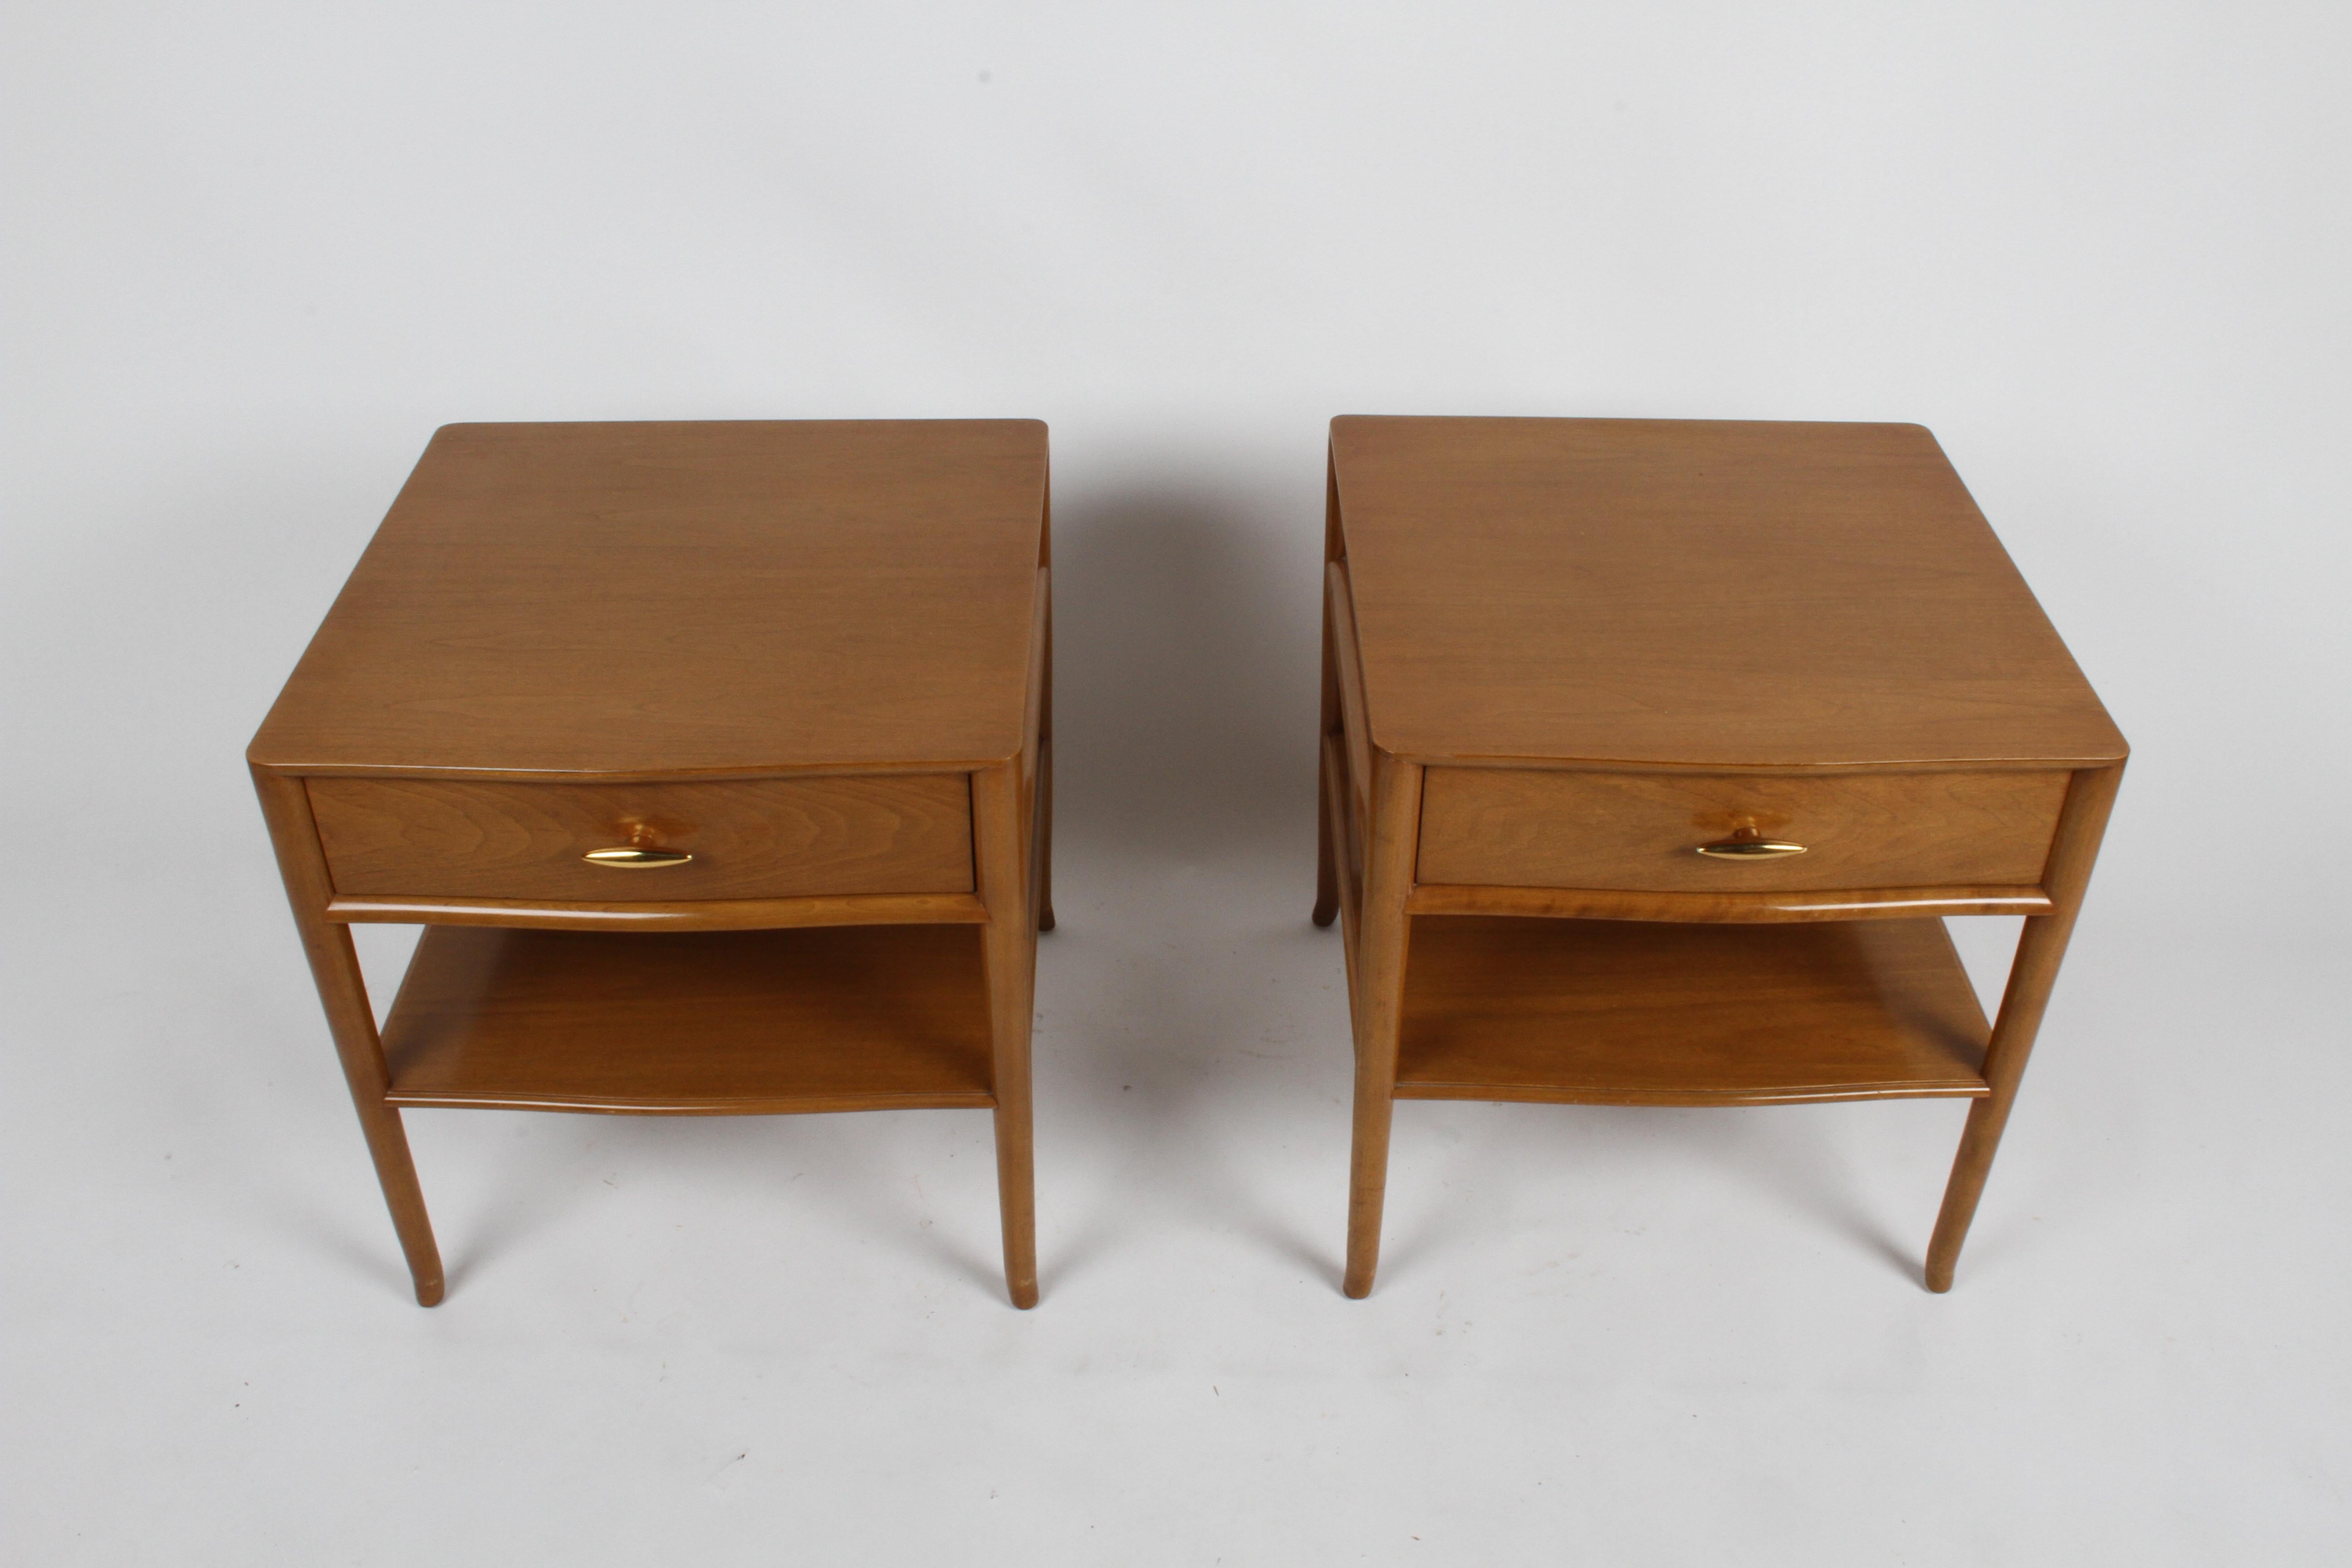 Pair of elegant and not often seen T. H. Robsjohn Gibbings nightstands for Widdicomb, dated 1955, label, walnut with original finish on splayed legs drawers having 24-karat gold porcelain handles. Tops always had glass, glass tops included, but they